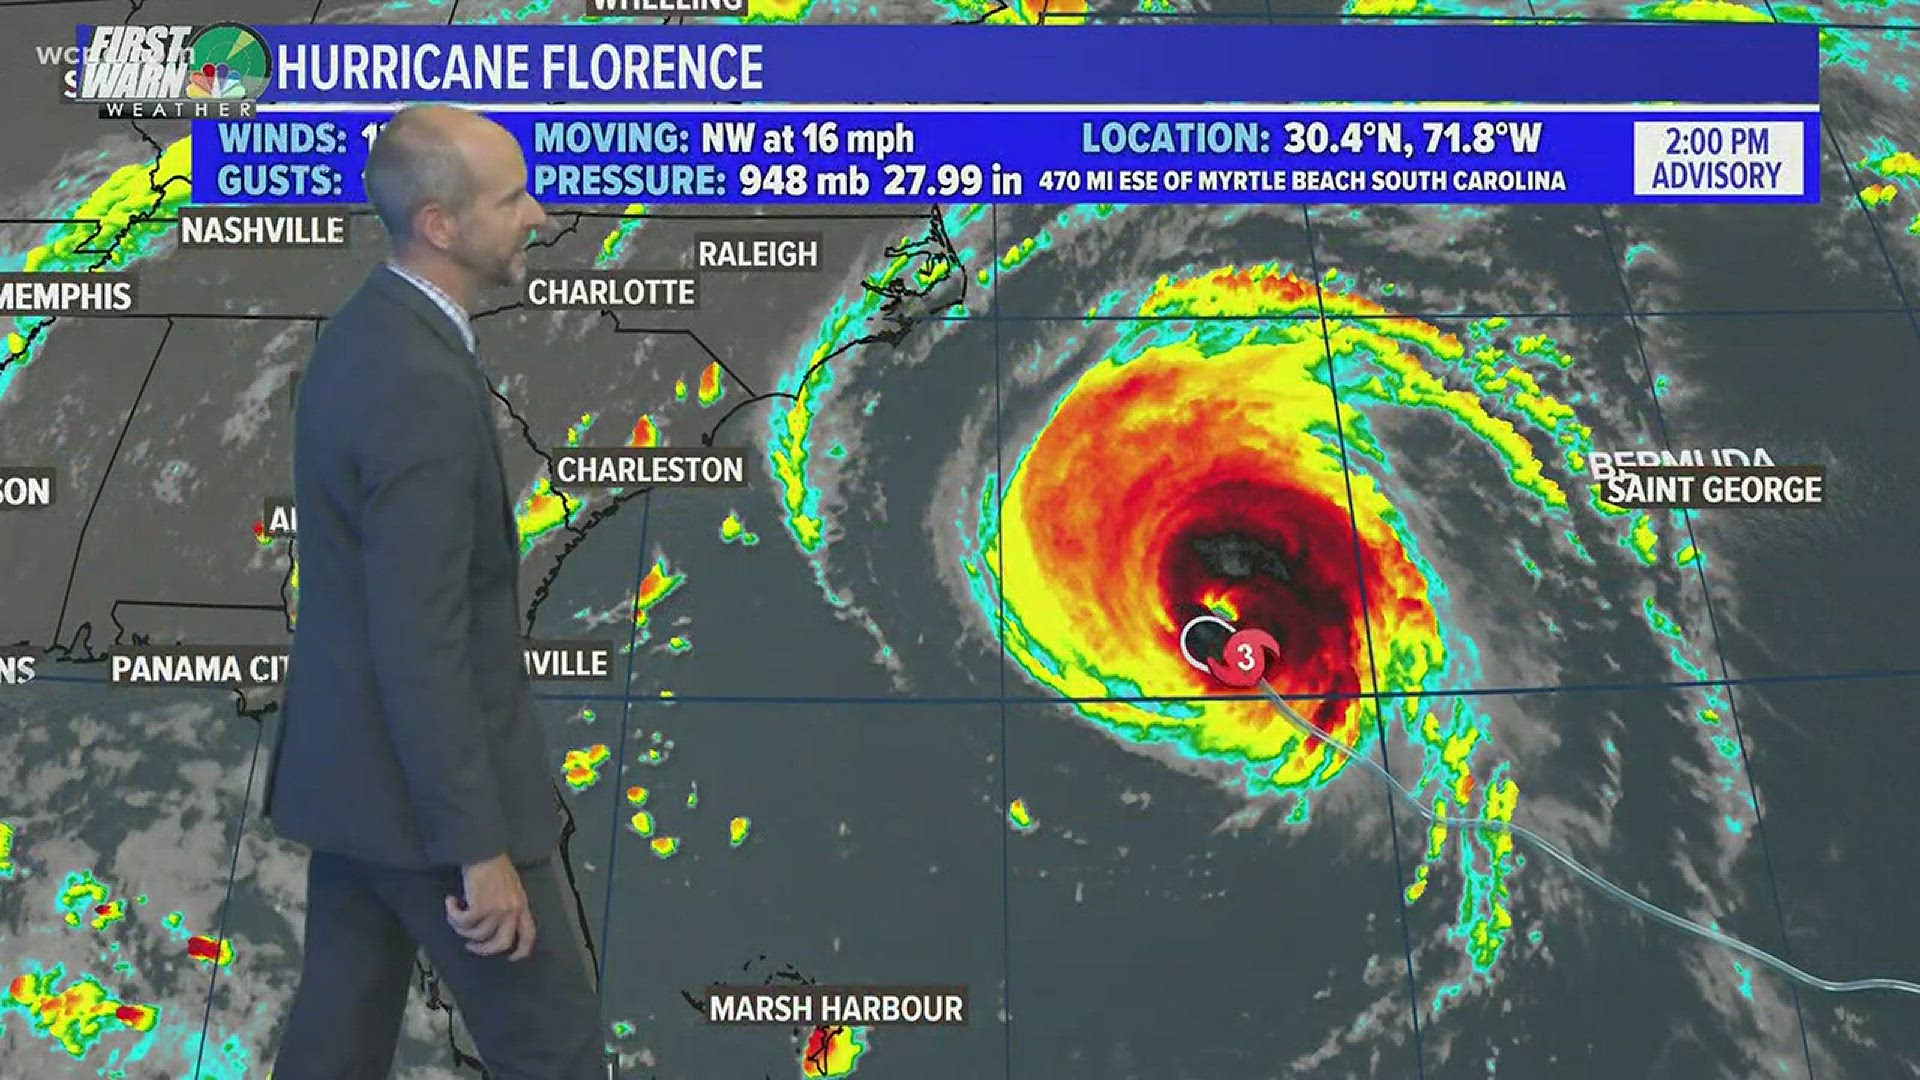 Hurricane Florence remains a powerful storm despite downgrading to Category 3. An earlier track showed Florence was going to move just north of Charlotte but it now appears Florence will eventually move southwest after making landfall and have a major imp